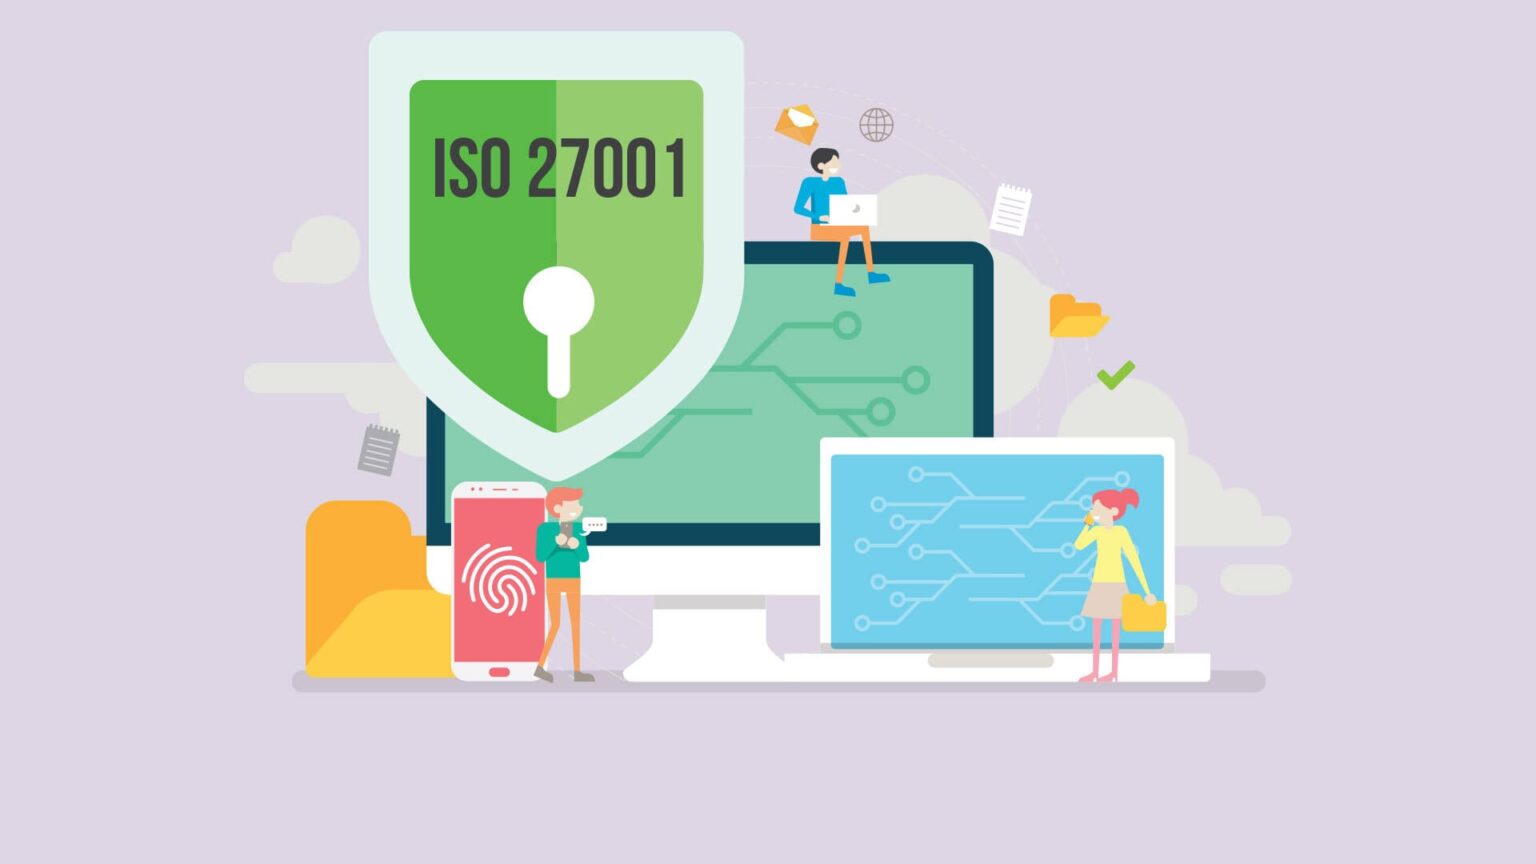 ISO 27001 Information Security Management System Certification | Inzinc Consulting